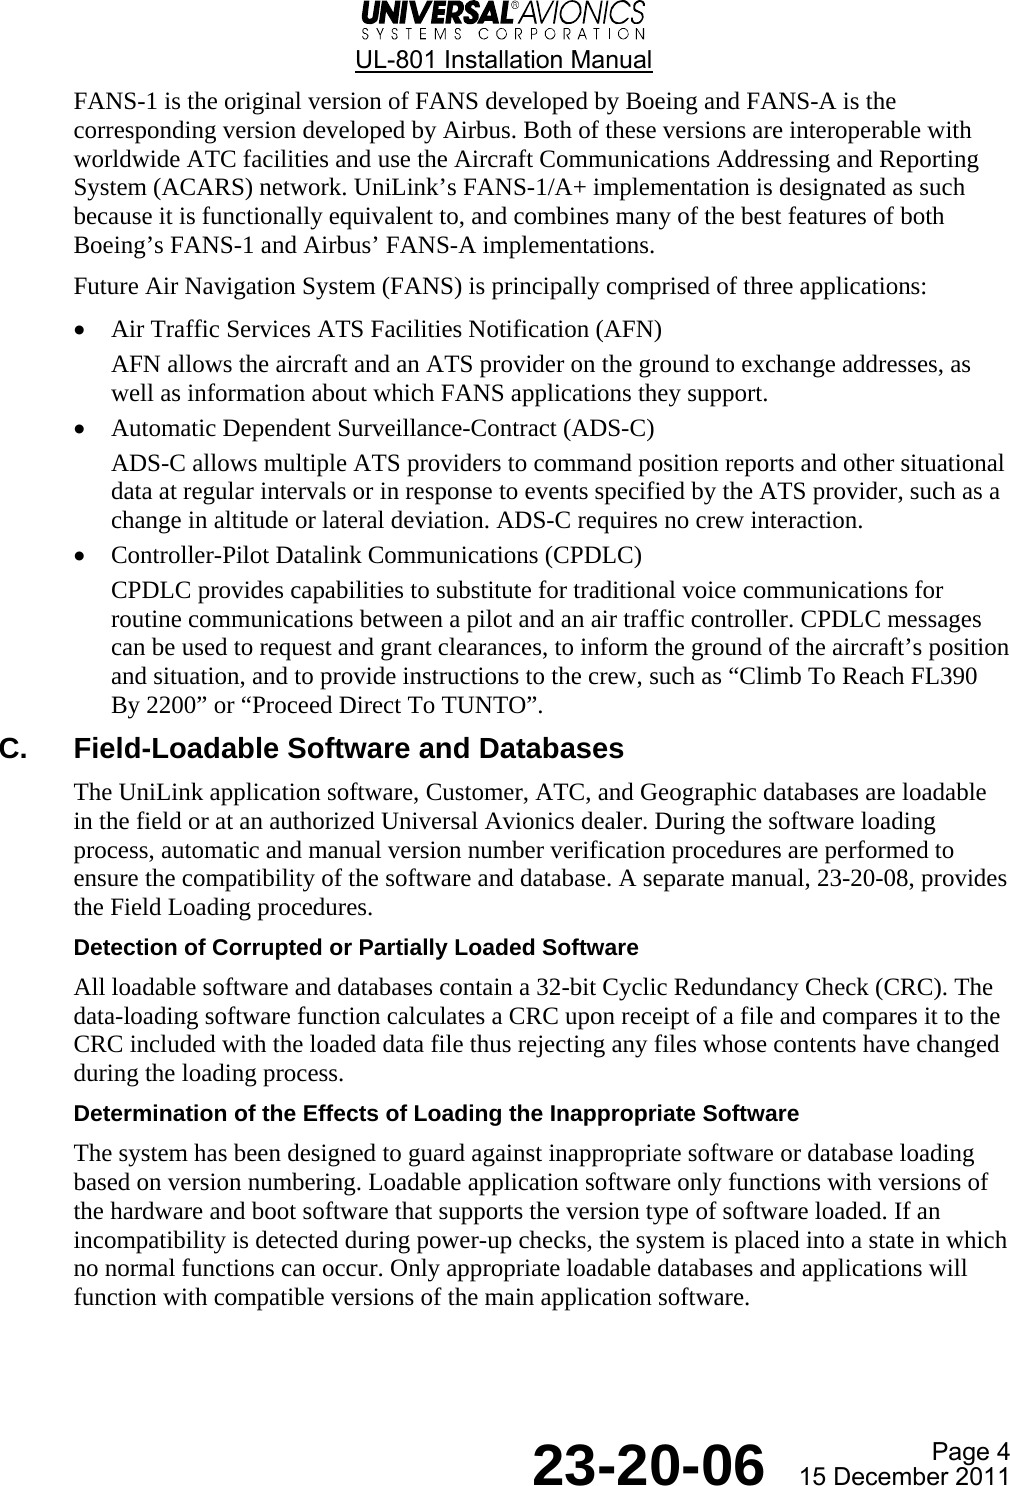  UL-801 Installation Manual  Page 4  23-20-06  15 December 2011 FANS-1 is the original version of FANS developed by Boeing and FANS-A is the corresponding version developed by Airbus. Both of these versions are interoperable with worldwide ATC facilities and use the Aircraft Communications Addressing and Reporting System (ACARS) network. UniLink’s FANS-1/A+ implementation is designated as such because it is functionally equivalent to, and combines many of the best features of both Boeing’s FANS-1 and Airbus’ FANS-A implementations. Future Air Navigation System (FANS) is principally comprised of three applications: • Air Traffic Services ATS Facilities Notification (AFN) AFN allows the aircraft and an ATS provider on the ground to exchange addresses, as well as information about which FANS applications they support. • Automatic Dependent Surveillance-Contract (ADS-C) ADS-C allows multiple ATS providers to command position reports and other situational data at regular intervals or in response to events specified by the ATS provider, such as a change in altitude or lateral deviation. ADS-C requires no crew interaction. • Controller-Pilot Datalink Communications (CPDLC) CPDLC provides capabilities to substitute for traditional voice communications for routine communications between a pilot and an air traffic controller. CPDLC messages can be used to request and grant clearances, to inform the ground of the aircraft’s position and situation, and to provide instructions to the crew, such as “Climb To Reach FL390 By 2200” or “Proceed Direct To TUNTO”. C.  Field-Loadable Software and Databases The UniLink application software, Customer, ATC, and Geographic databases are loadable in the field or at an authorized Universal Avionics dealer. During the software loading process, automatic and manual version number verification procedures are performed to ensure the compatibility of the software and database. A separate manual, 23-20-08, provides the Field Loading procedures. Detection of Corrupted or Partially Loaded Software All loadable software and databases contain a 32-bit Cyclic Redundancy Check (CRC). The data-loading software function calculates a CRC upon receipt of a file and compares it to the CRC included with the loaded data file thus rejecting any files whose contents have changed during the loading process. Determination of the Effects of Loading the Inappropriate Software The system has been designed to guard against inappropriate software or database loading based on version numbering. Loadable application software only functions with versions of the hardware and boot software that supports the version type of software loaded. If an incompatibility is detected during power-up checks, the system is placed into a state in which no normal functions can occur. Only appropriate loadable databases and applications will function with compatible versions of the main application software.   